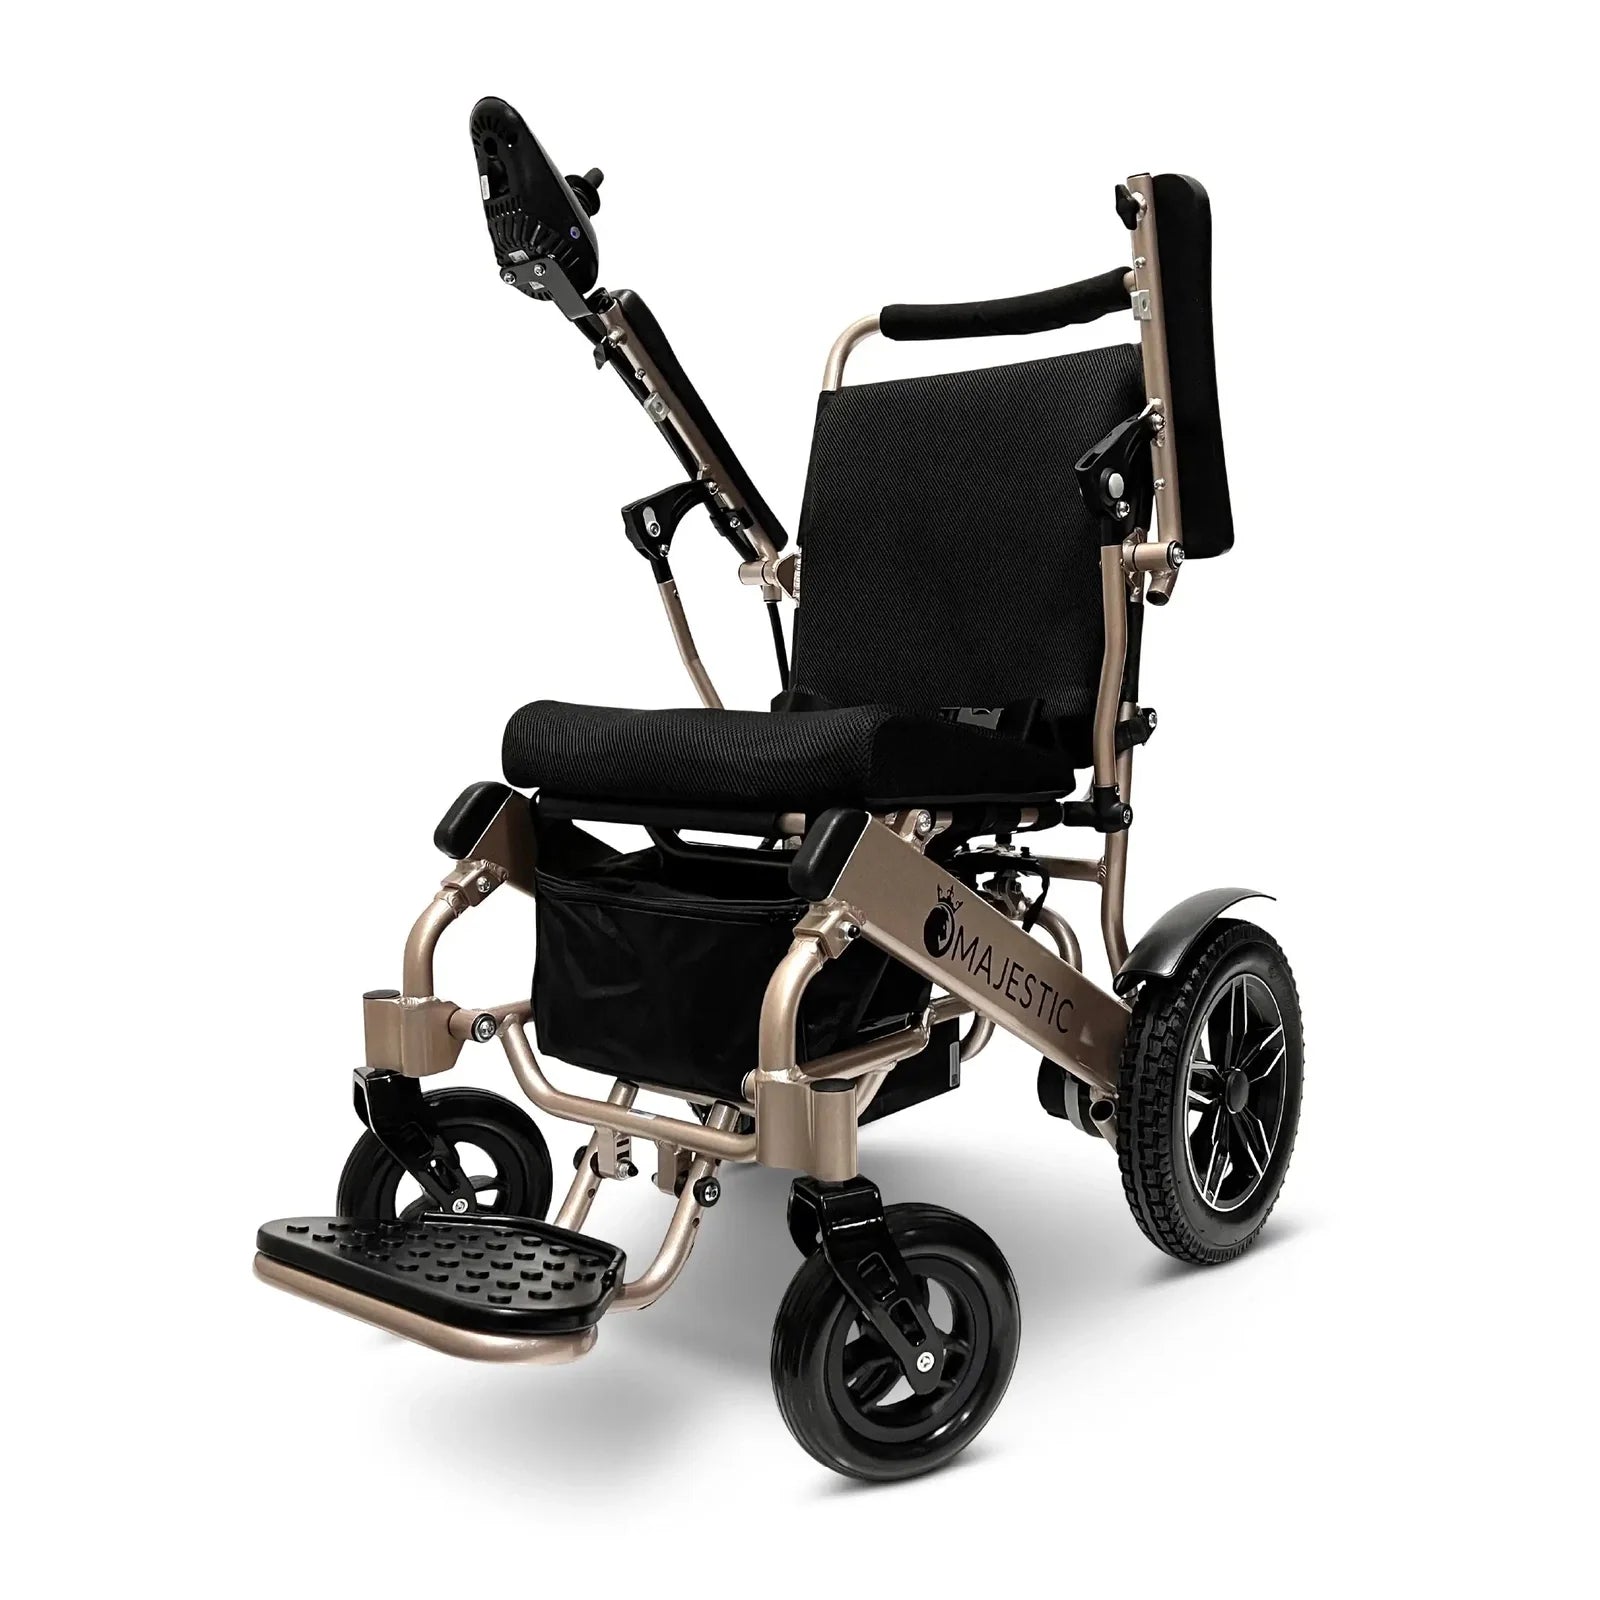 ComfyGO Majestic IQ-8000 Remote Controlled Lightweight Folding Electric Wheelchair Power Wheelchairs ComfyGO Bronze Standard 10 Miles & 17.5" Seat Width